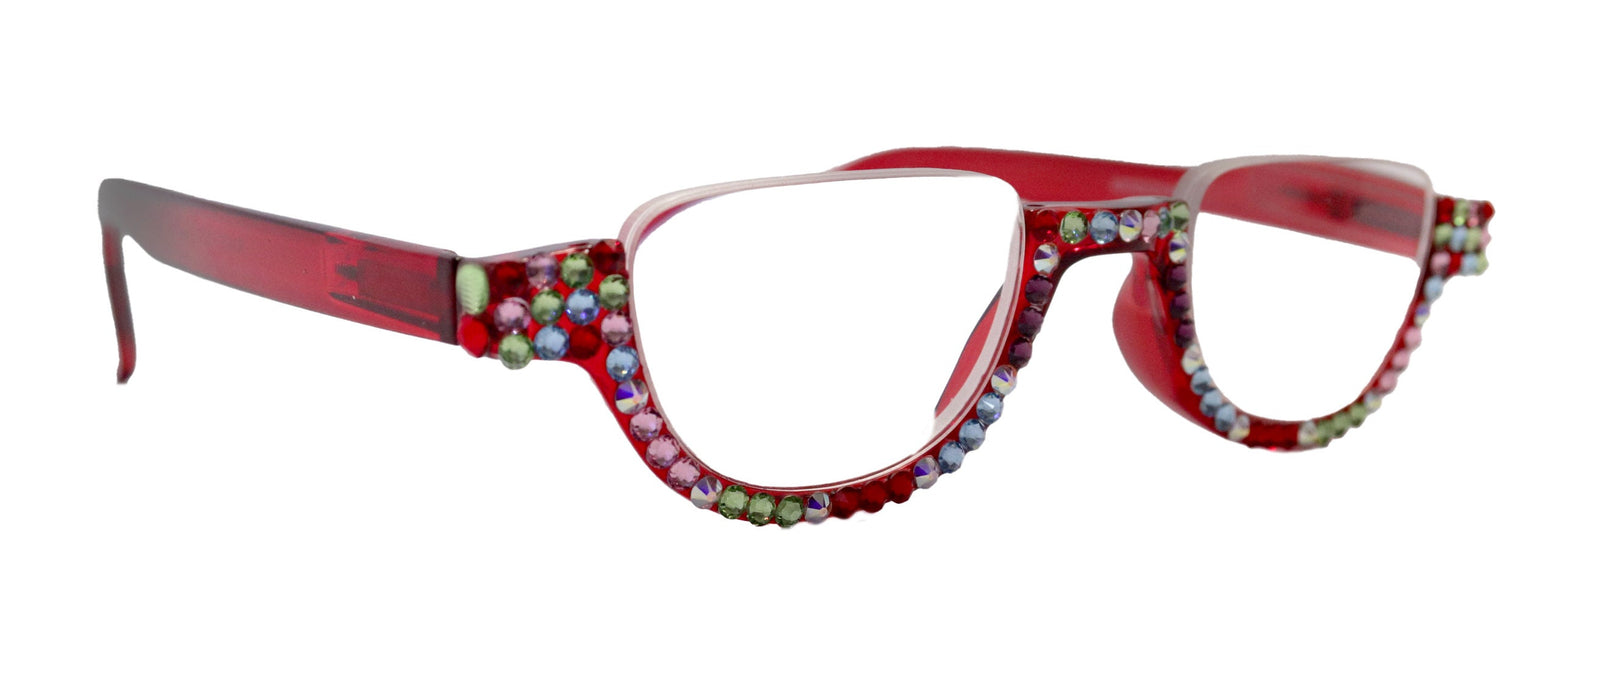 Half Moon, (Bling) Woman Reading Glasses Adorned W Genuine European Crystals, Reader Magnifying, (Red) NY Fifth Avenue.